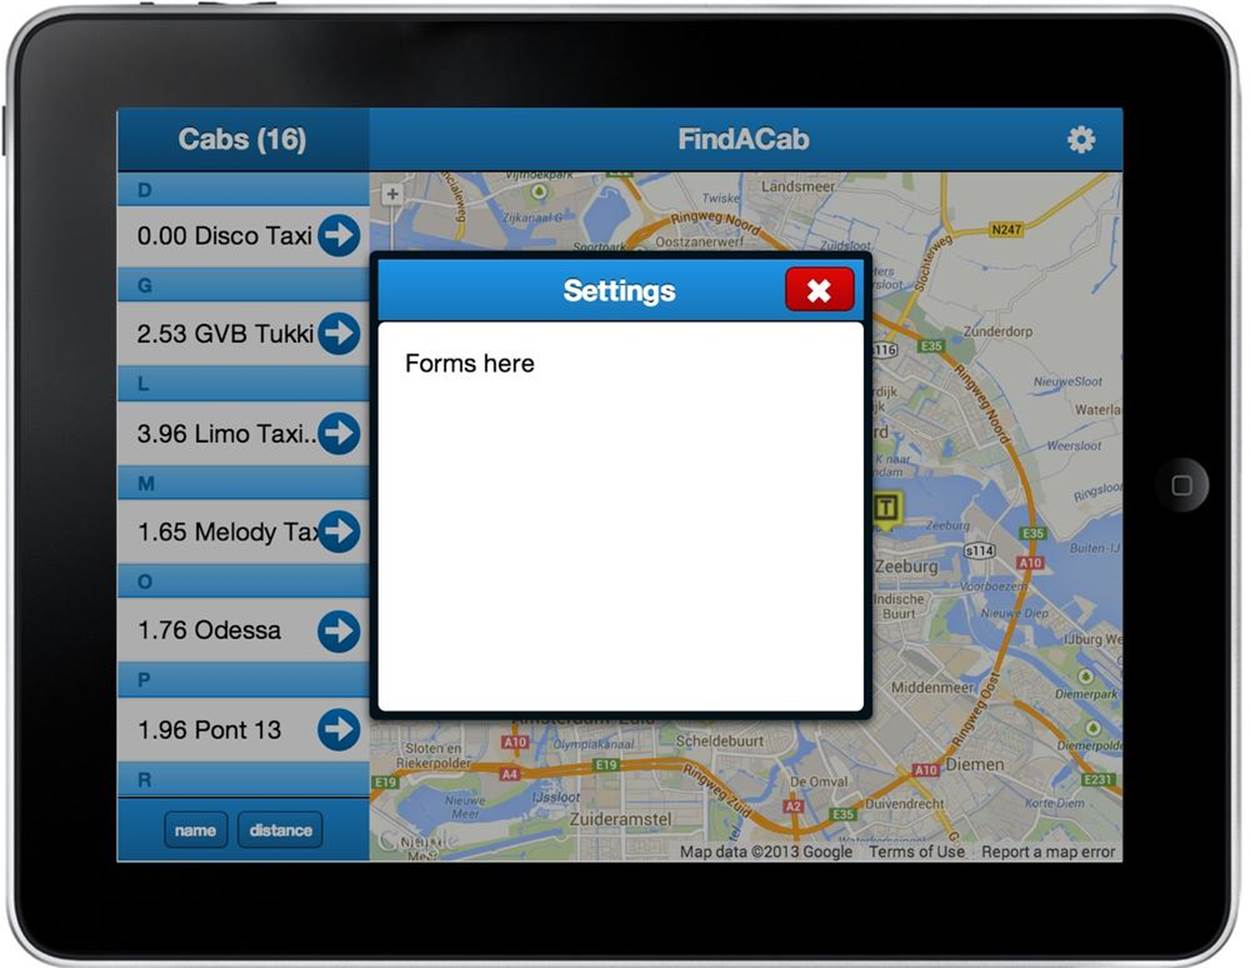 The FindACab app overlay